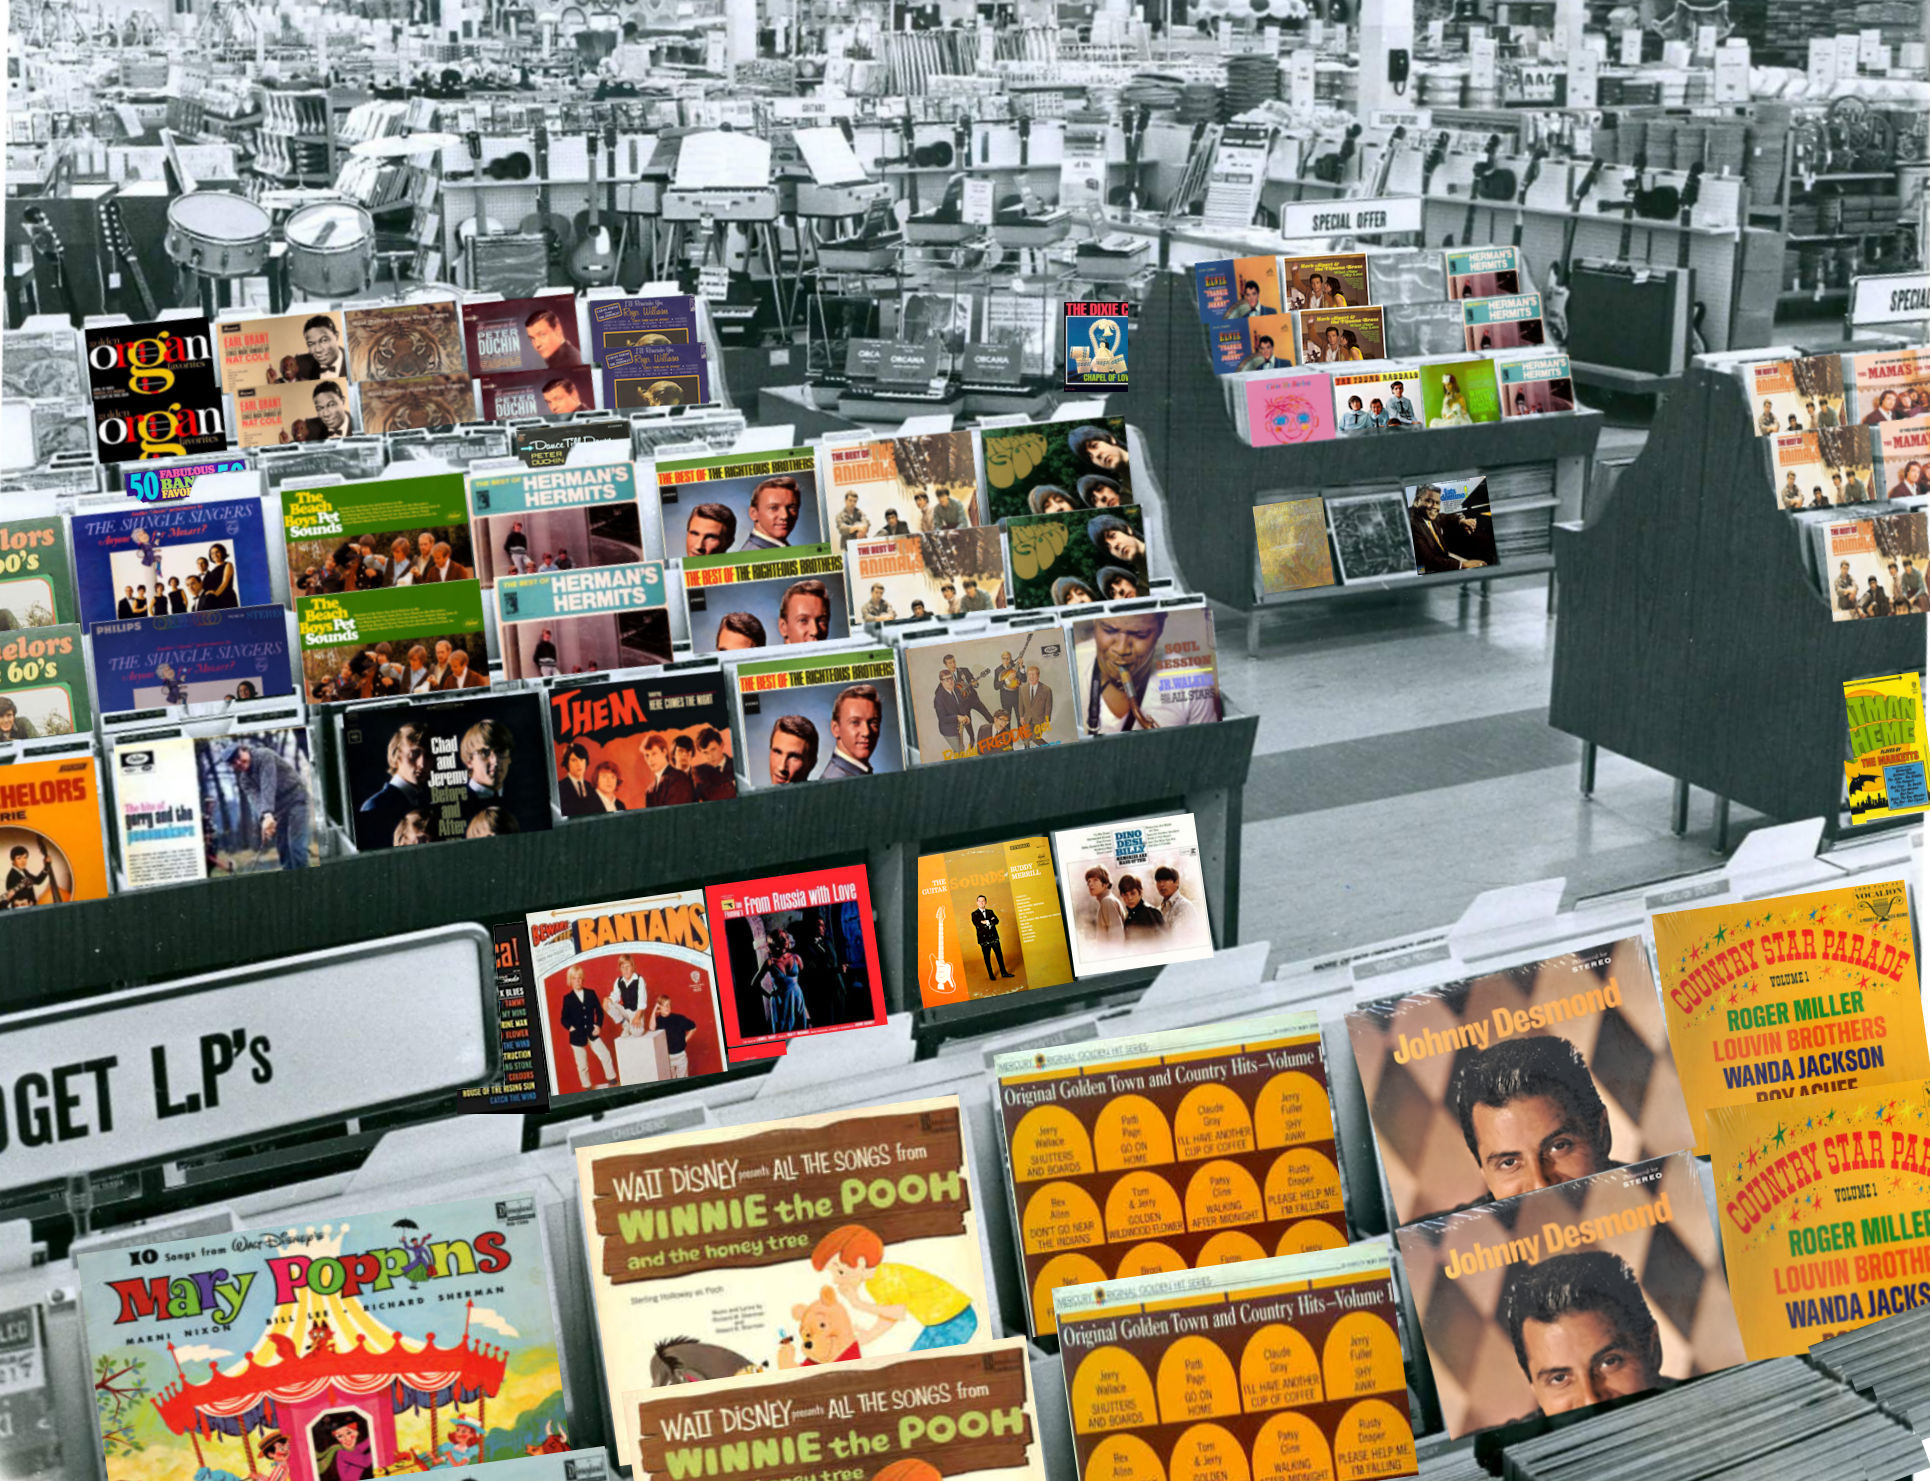 Woolco Record Department, Argyle Mall, London, Ontario, Canada, June 1966, coloured covers, mylifeinconcert.com